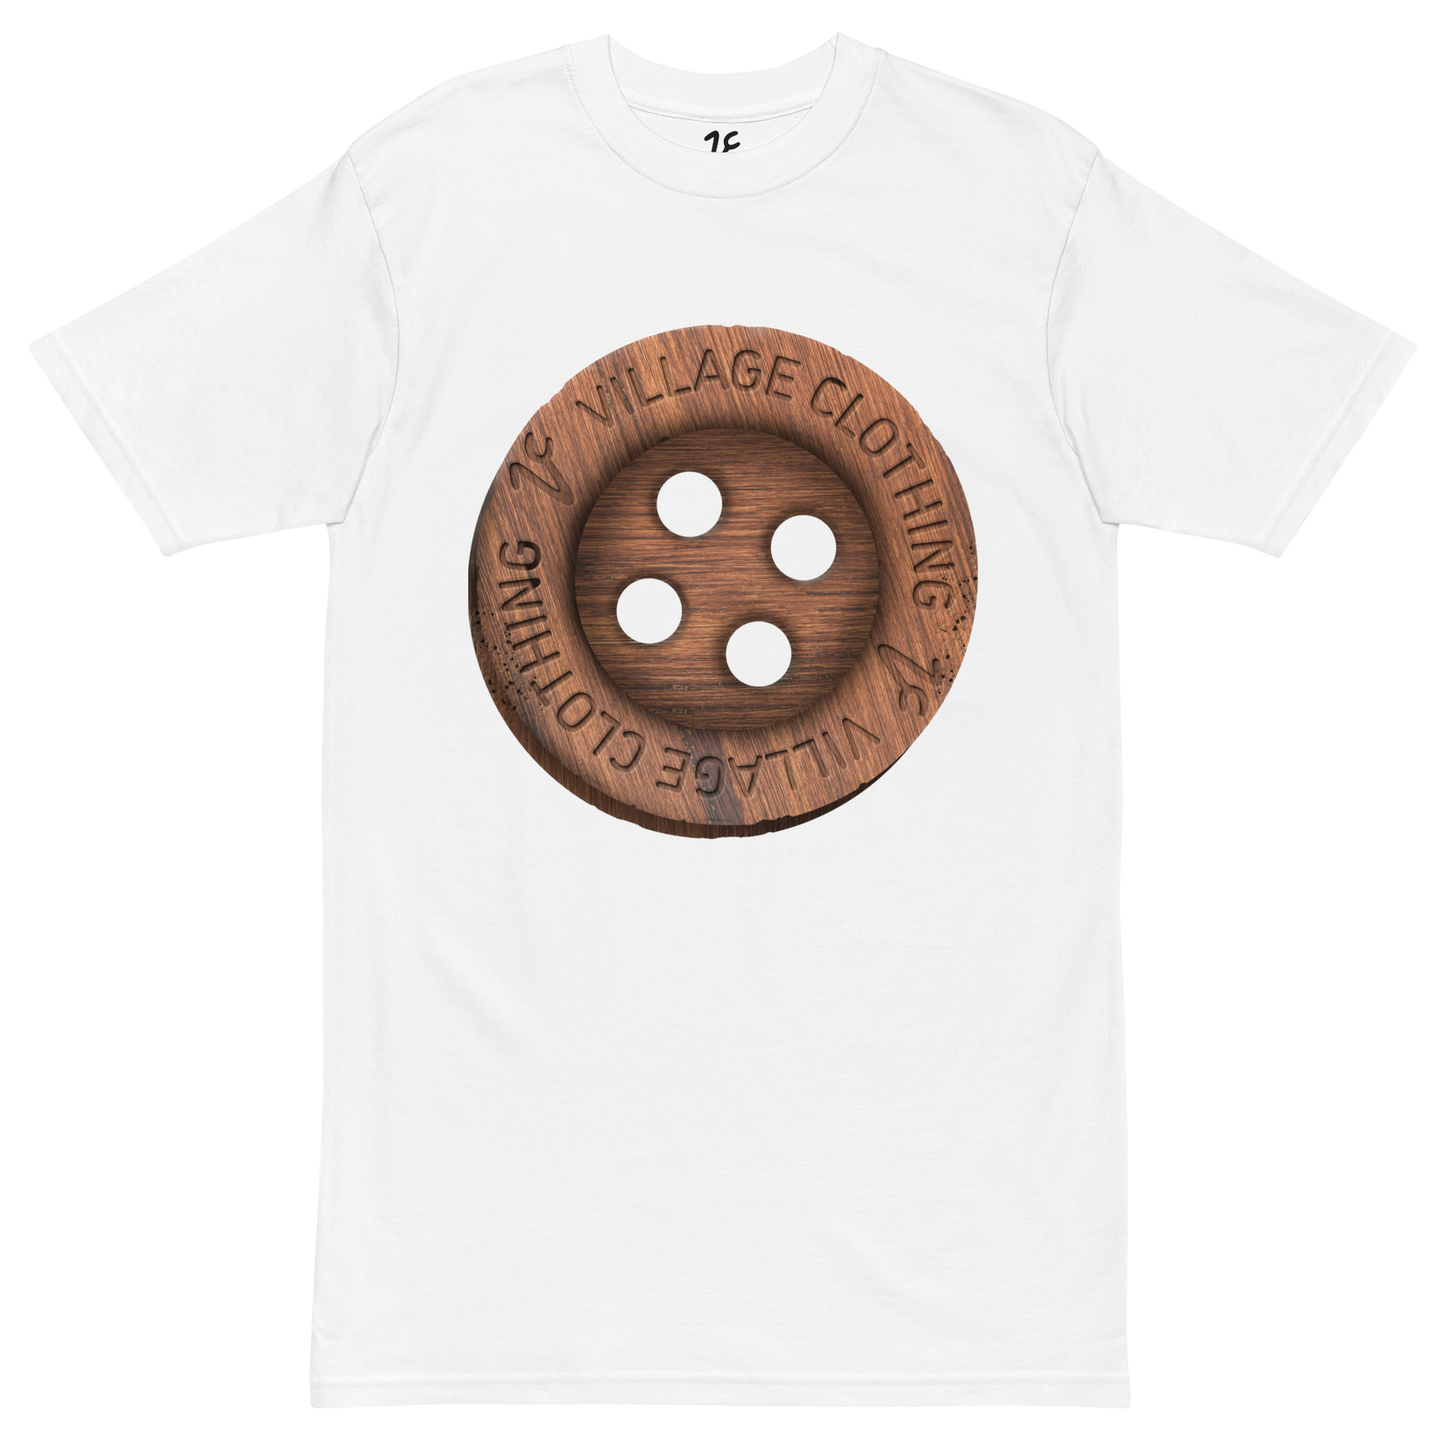 The VC Wood Button Tee